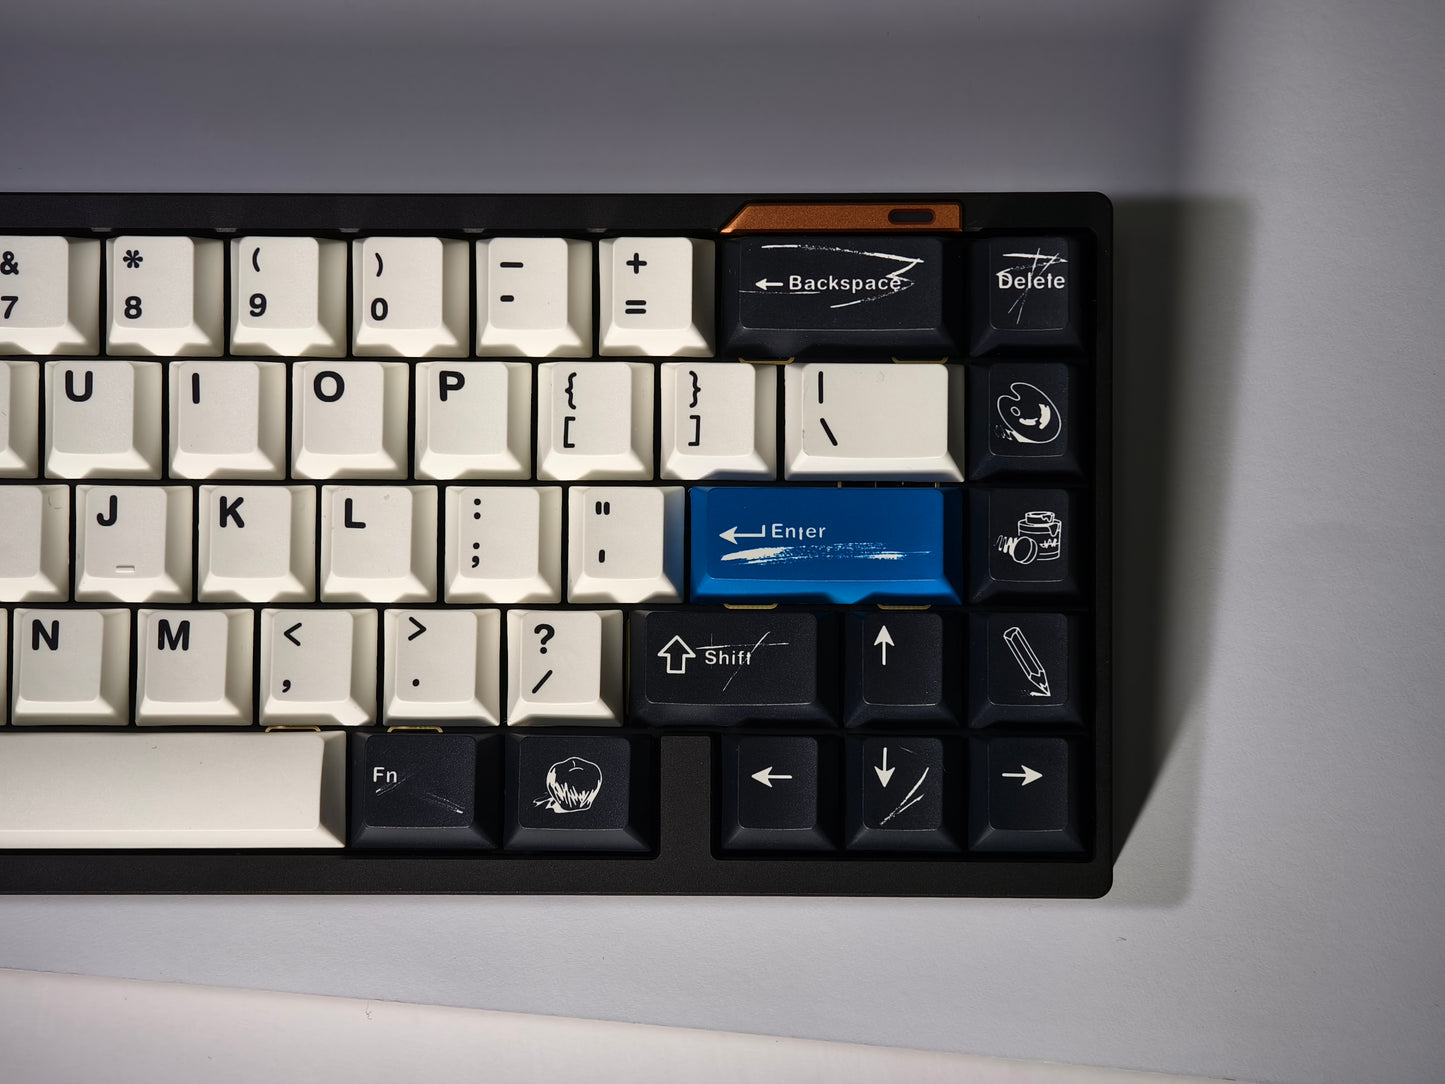 Creation PBT Dye Sublimation Cherry Keycaps Set（Free Shipping To Some Countries）